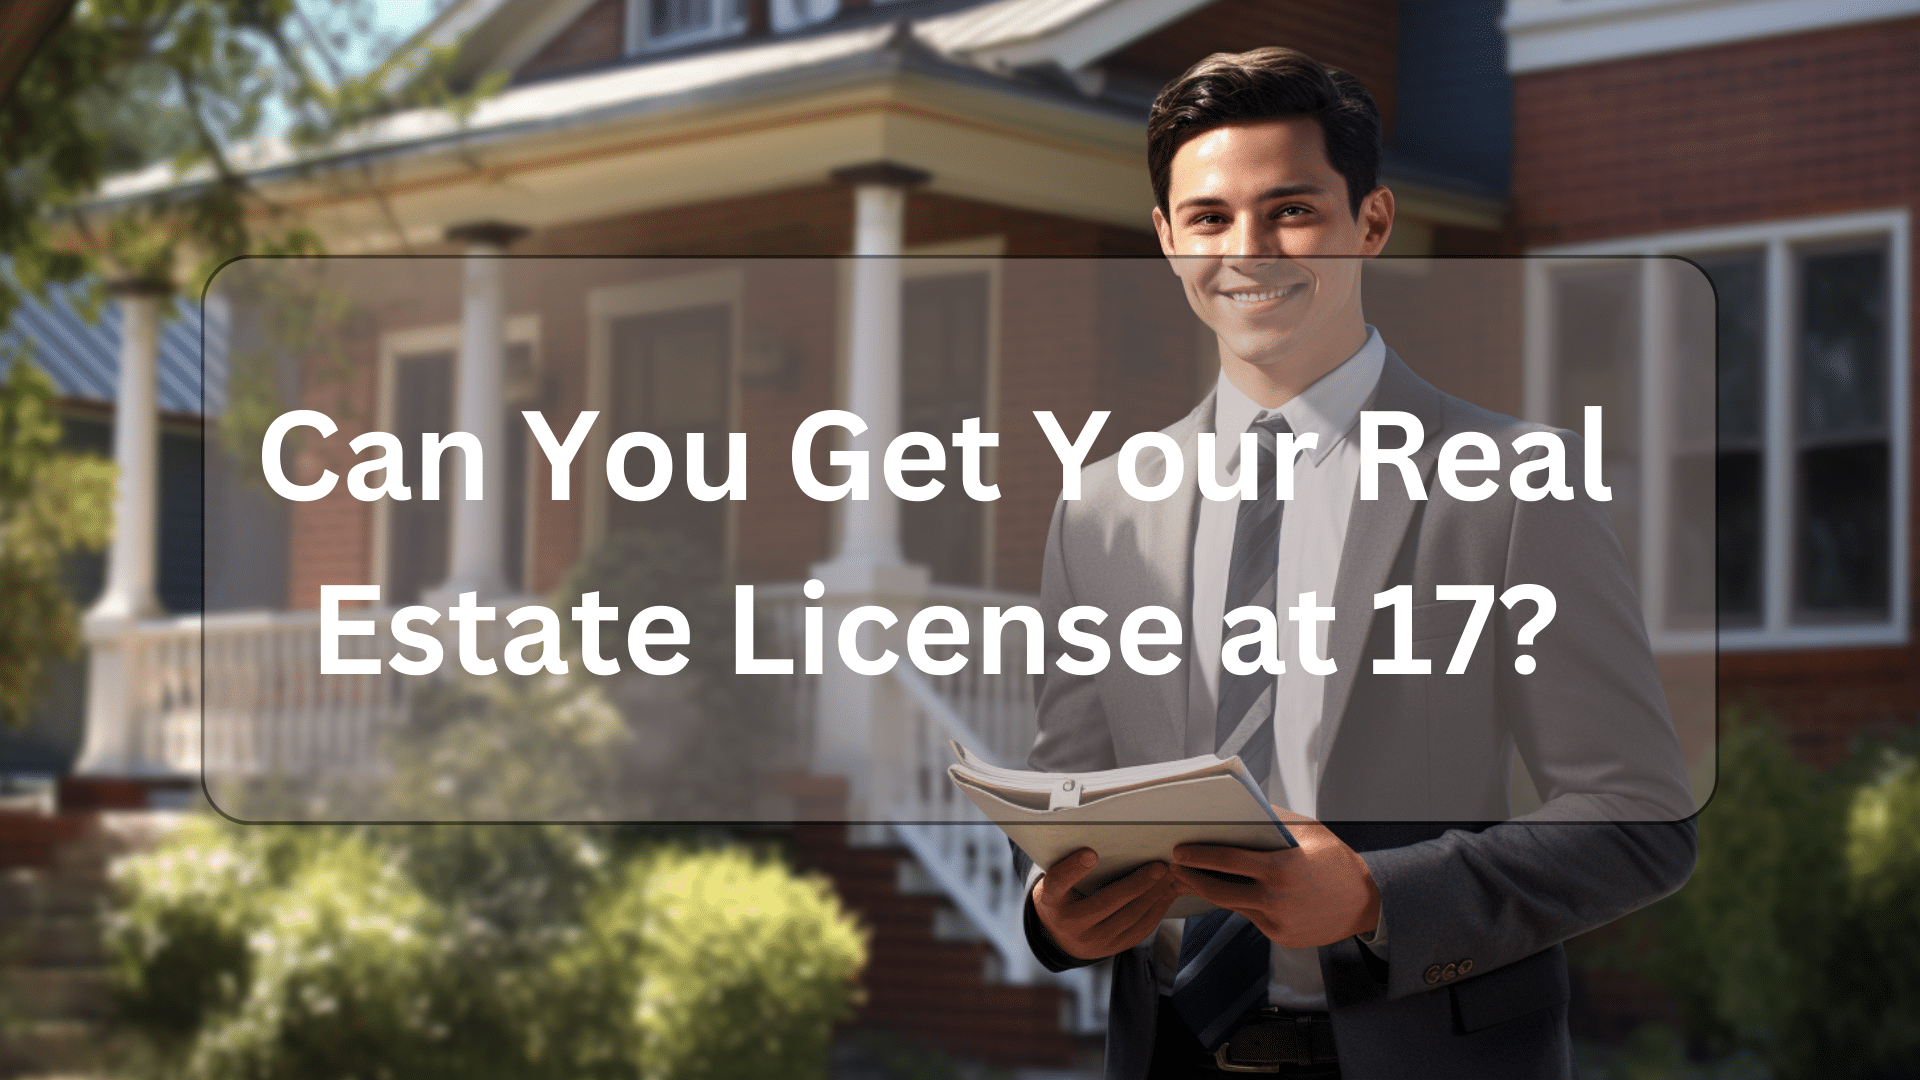 Can You Get Your Real Estate License at 17?